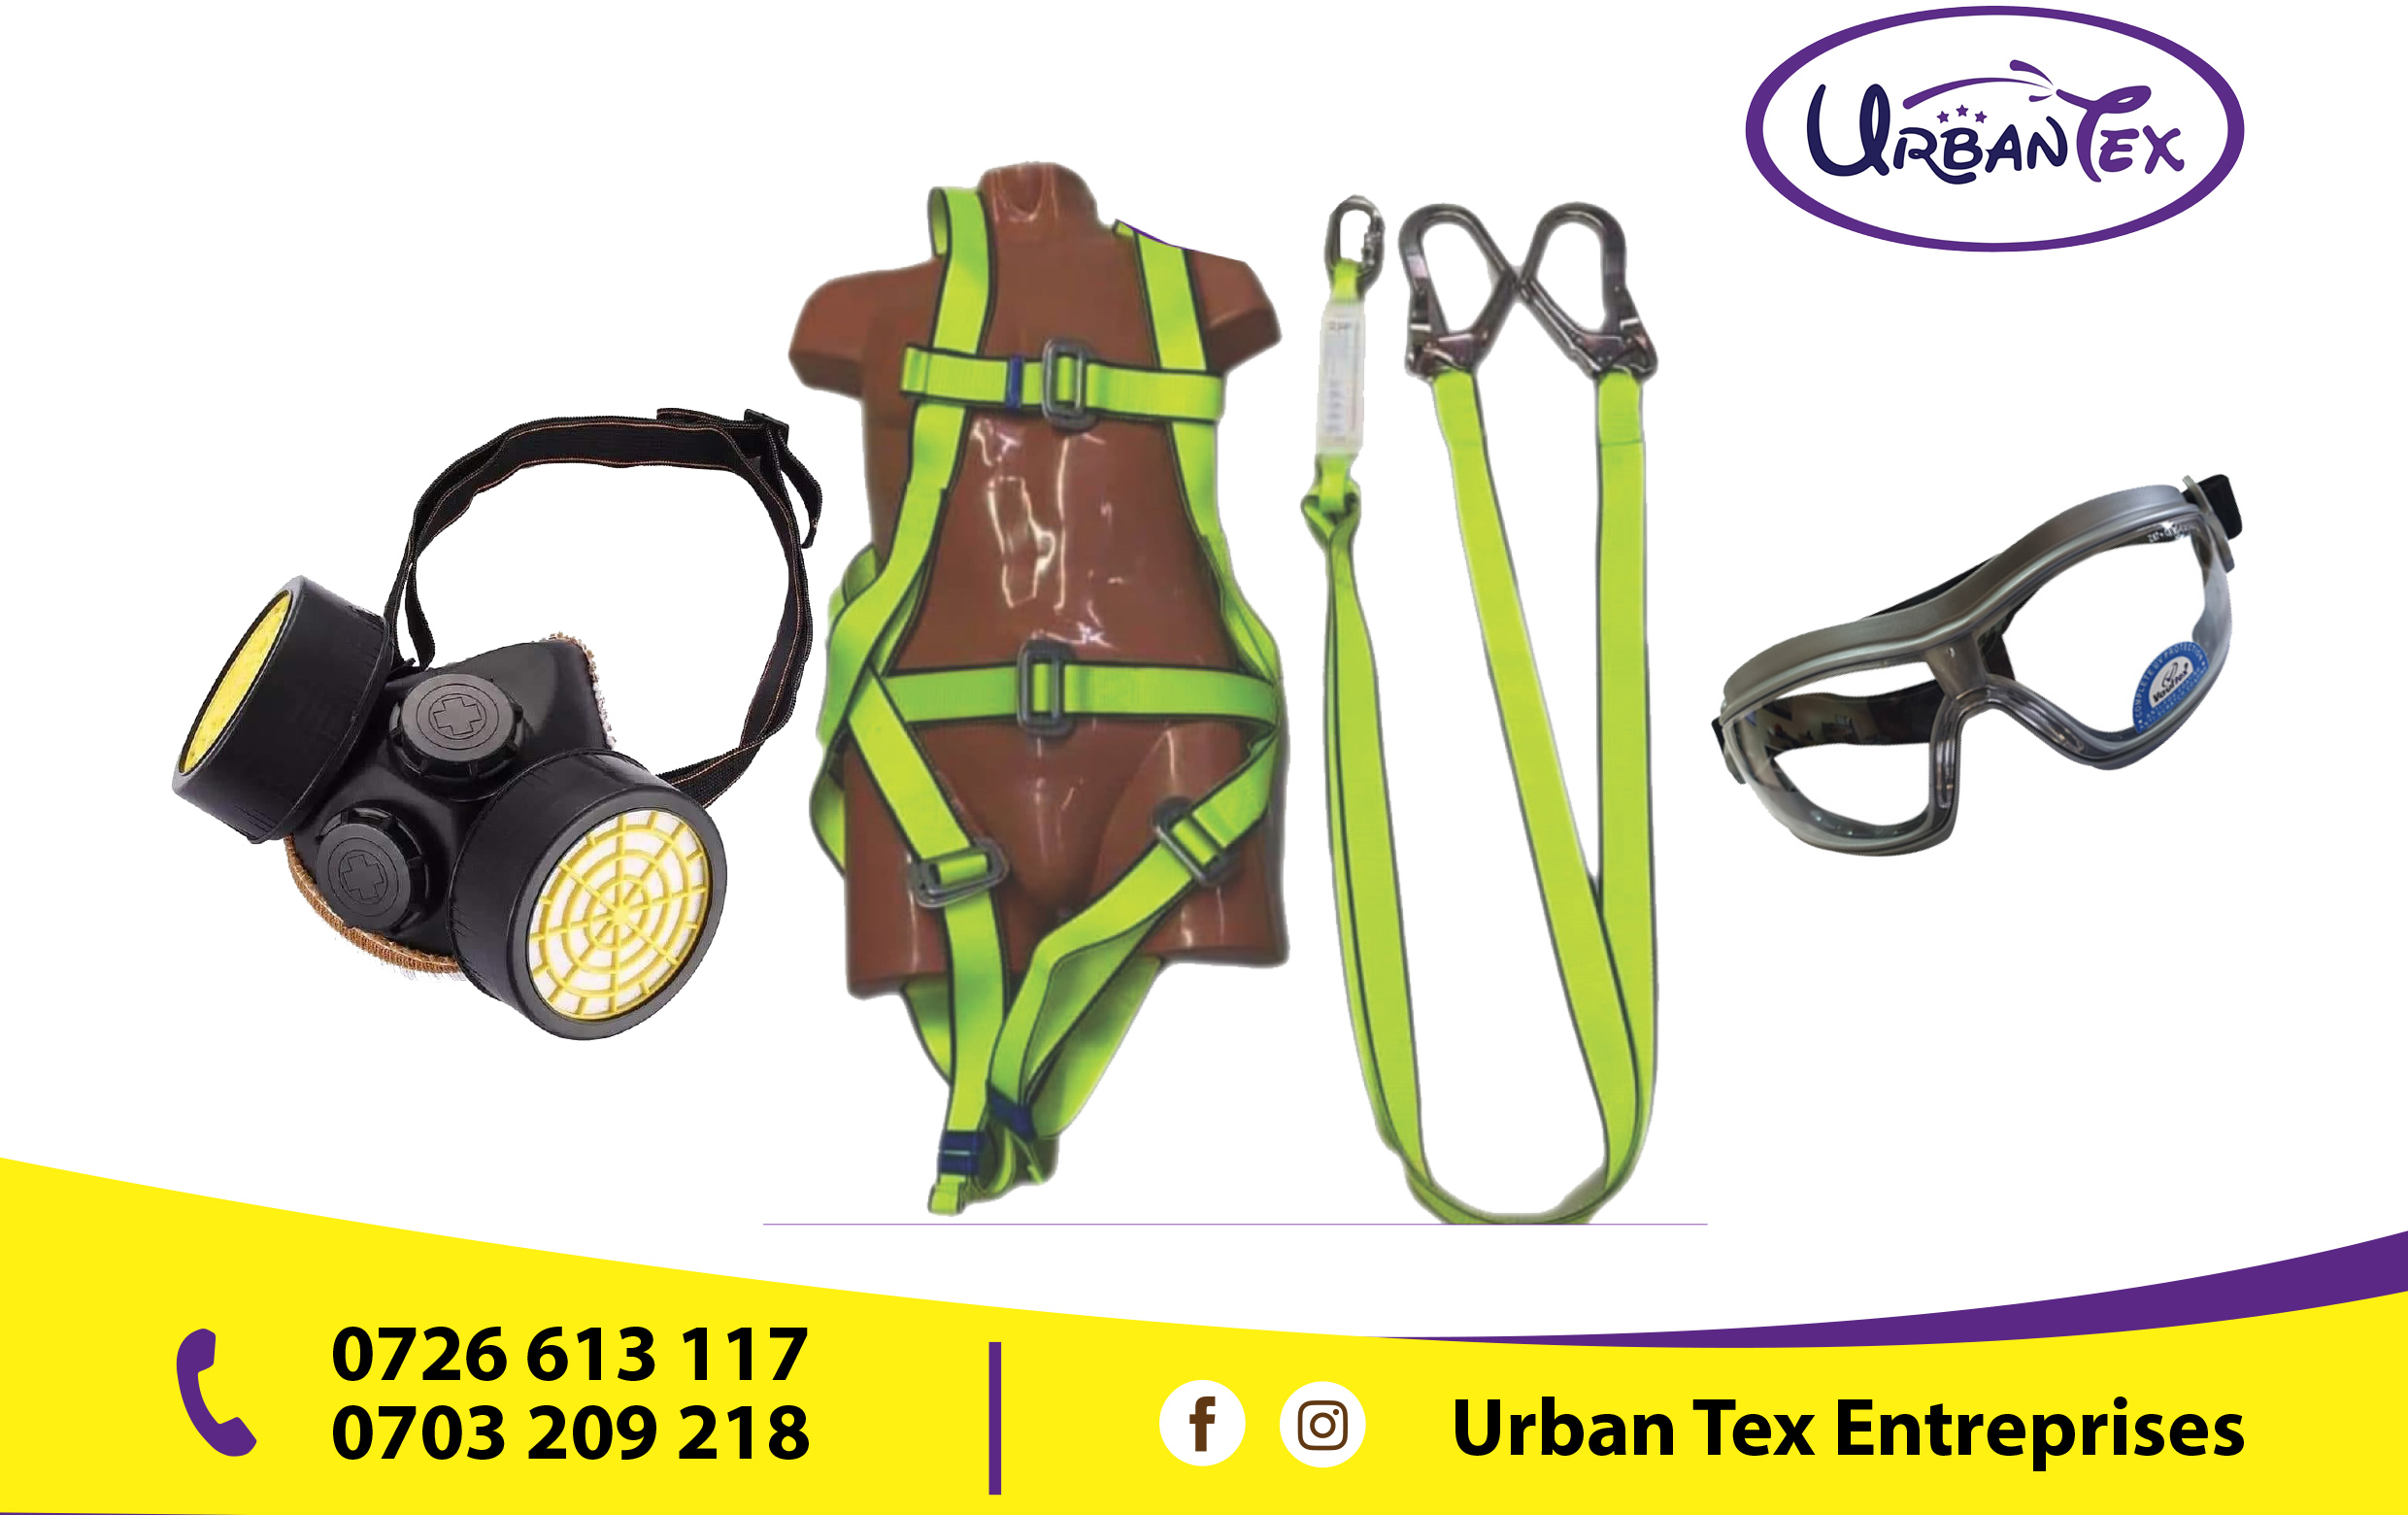 Safety Harness Suppliers in Nairobi